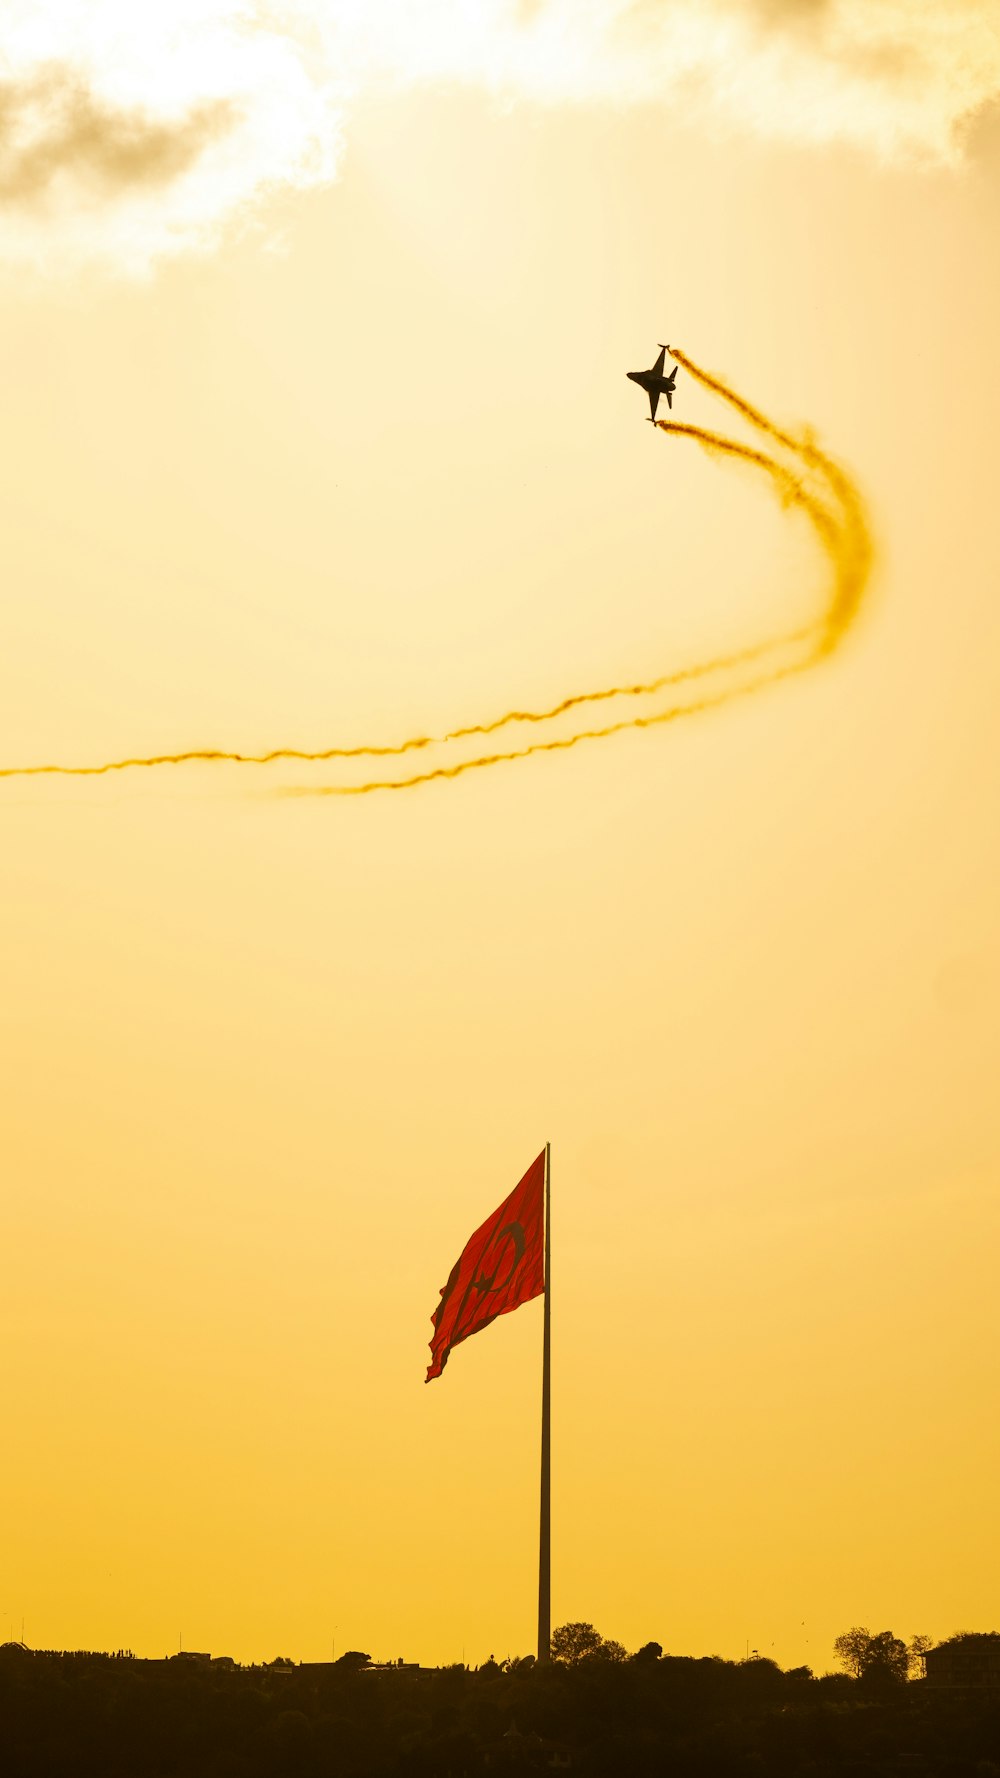 a plane flying in the sky with a red flag